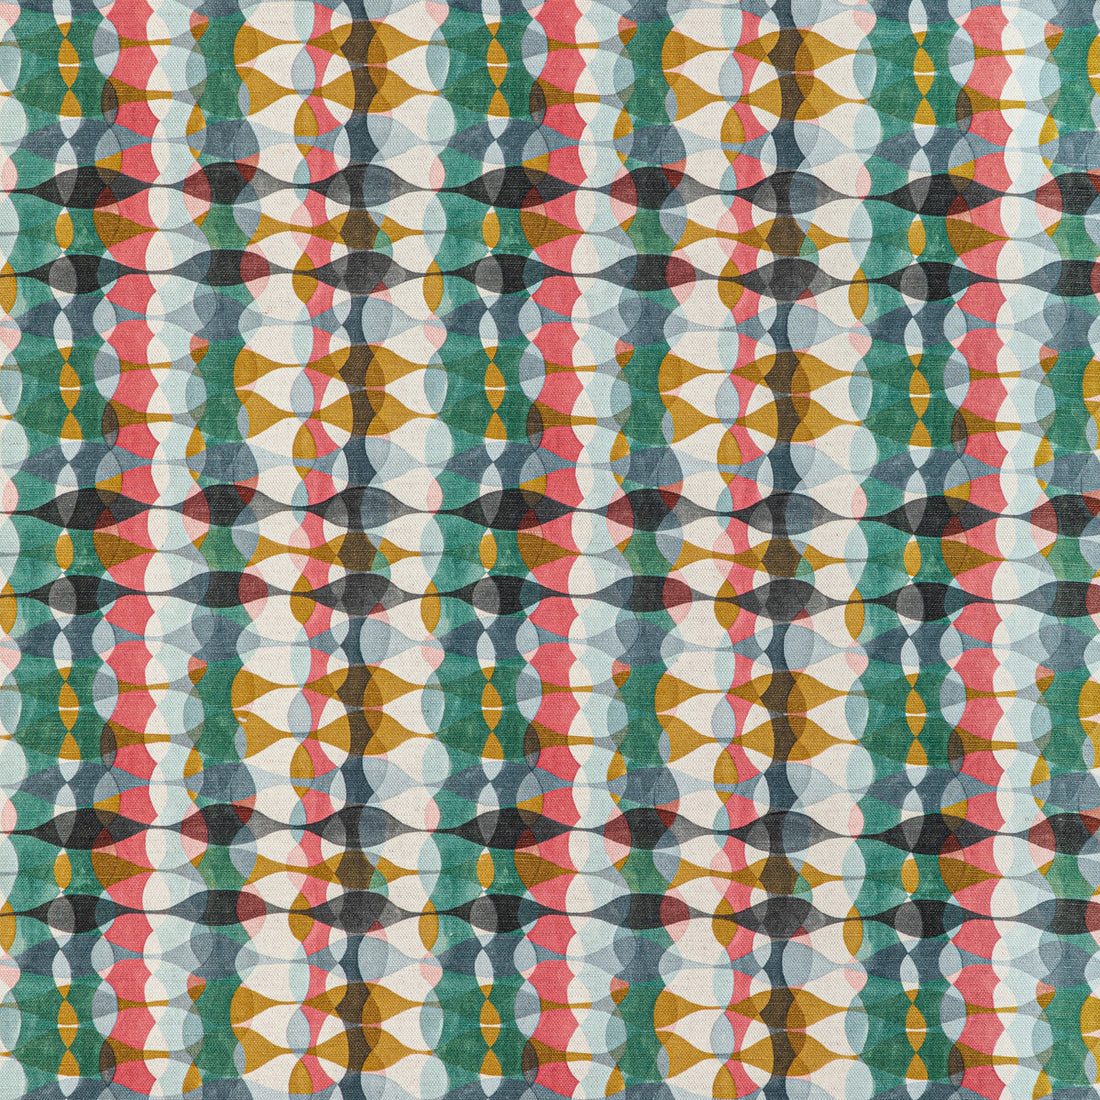 Overtone Print fabric in multi color - pattern GWF-3775.73.0 - by Lee Jofa Modern in the Rhapsody collection